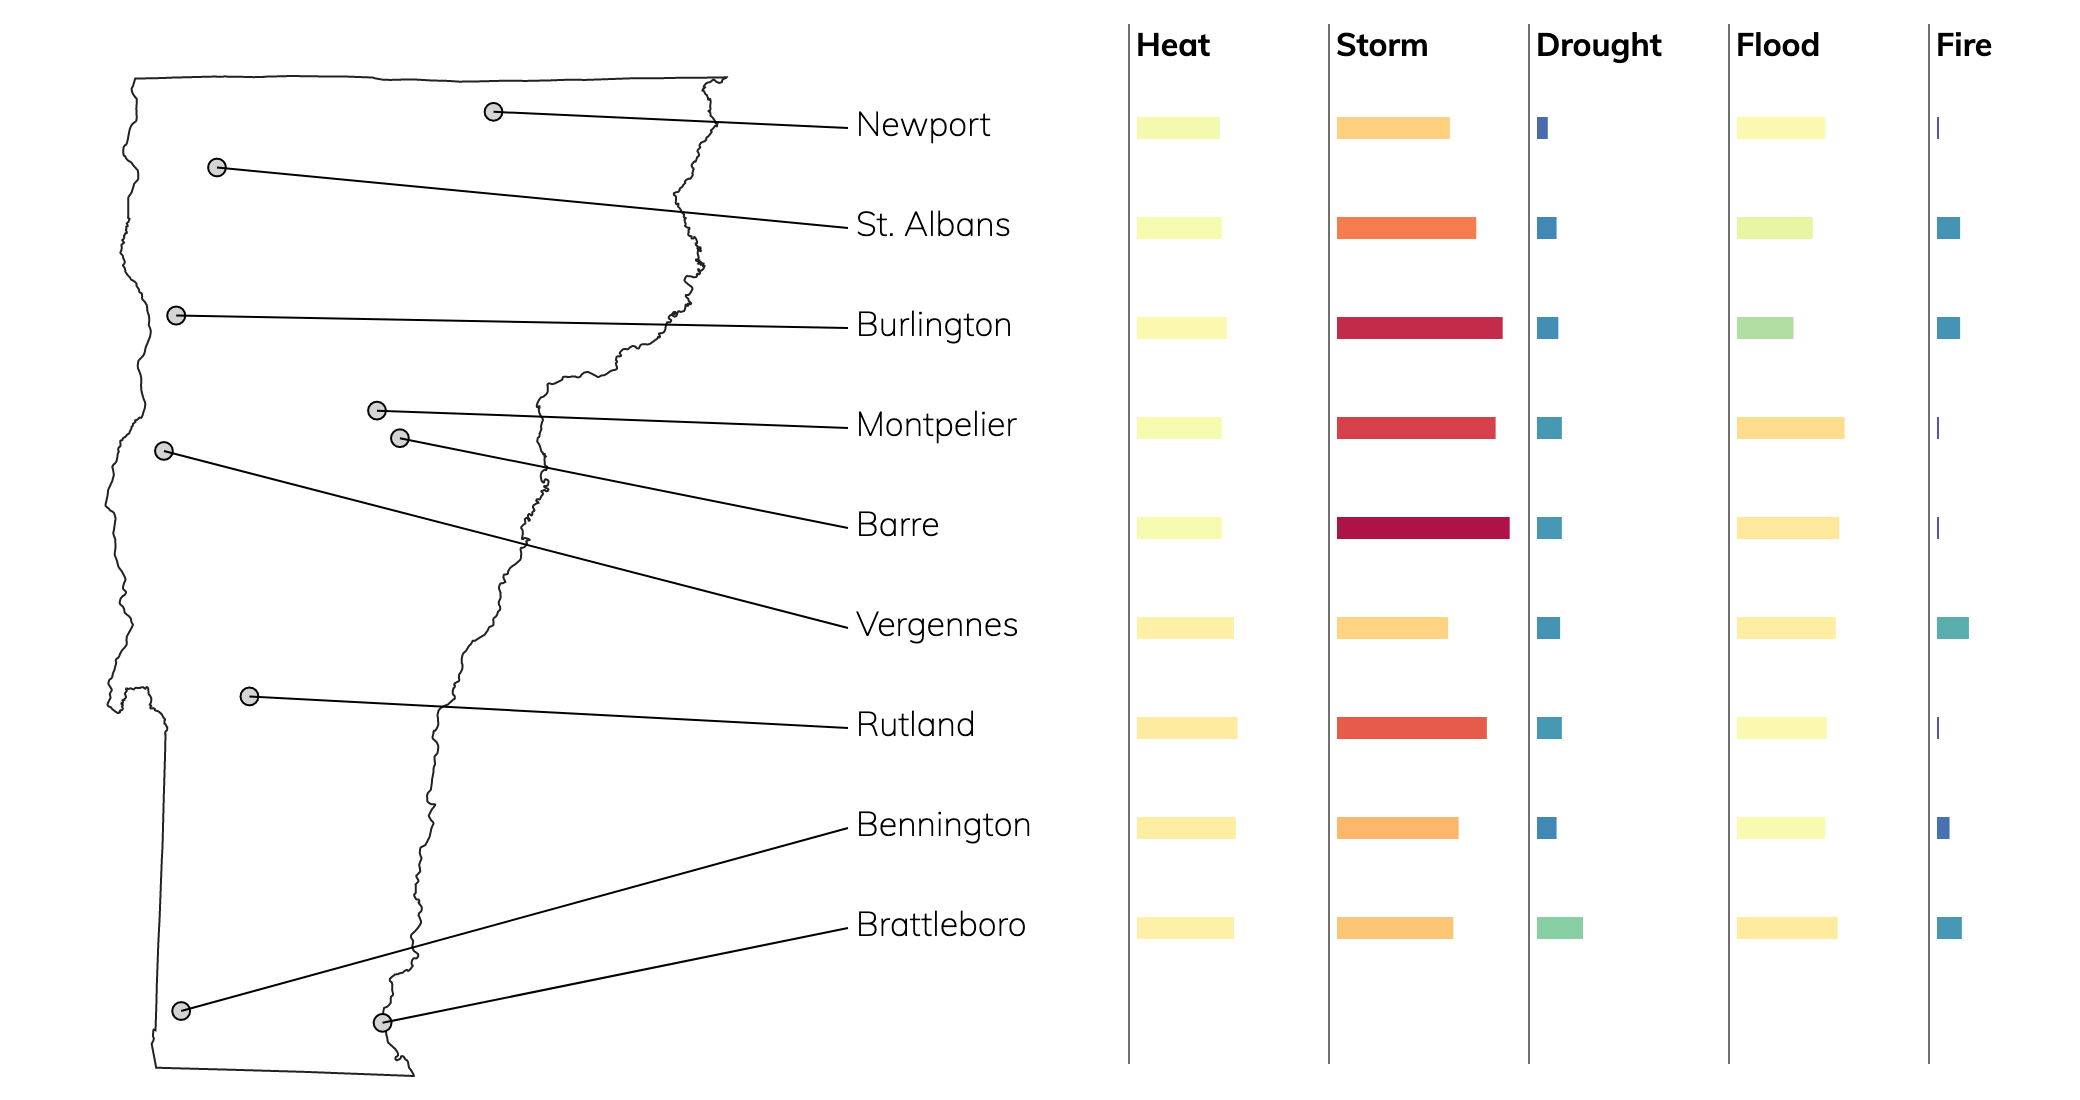 Climate Change Risk Ratings for Cities in Vermont